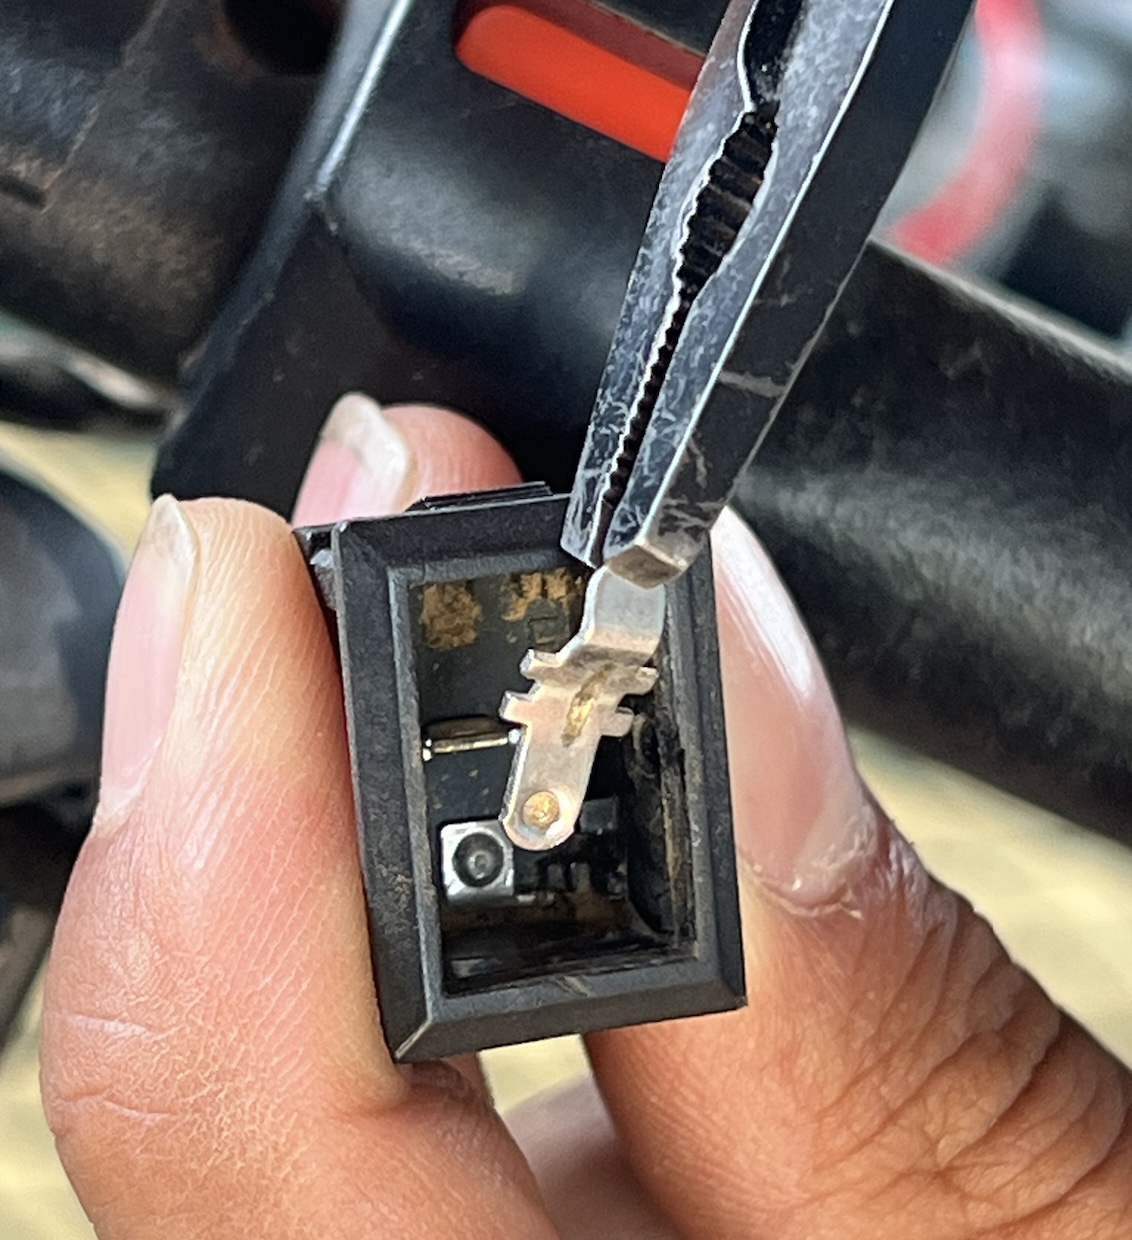 The suspect switch component